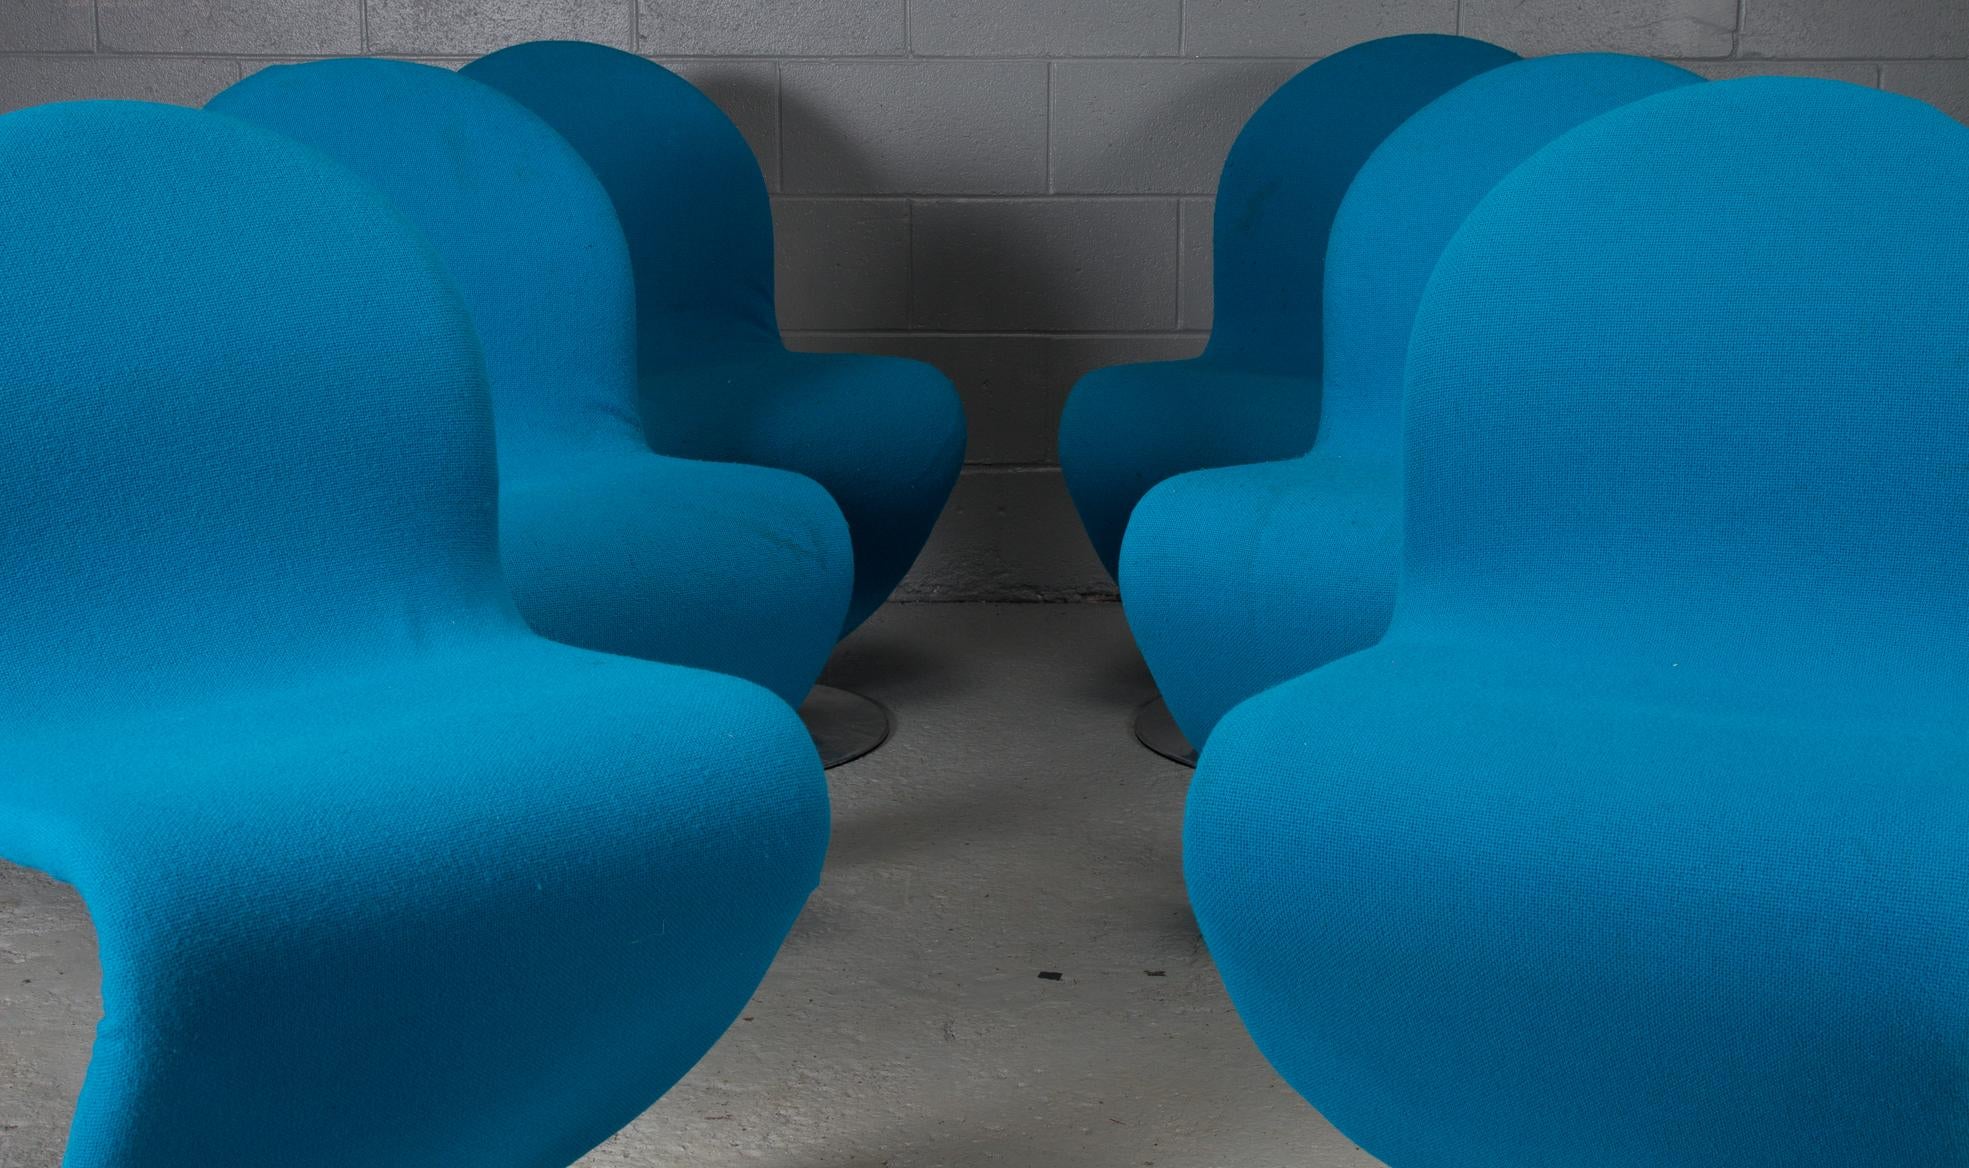 Set of Six Danish Modern 1-2-3 Chairs by Verner Panton for Fritz Hansen, 1950s For Sale 4